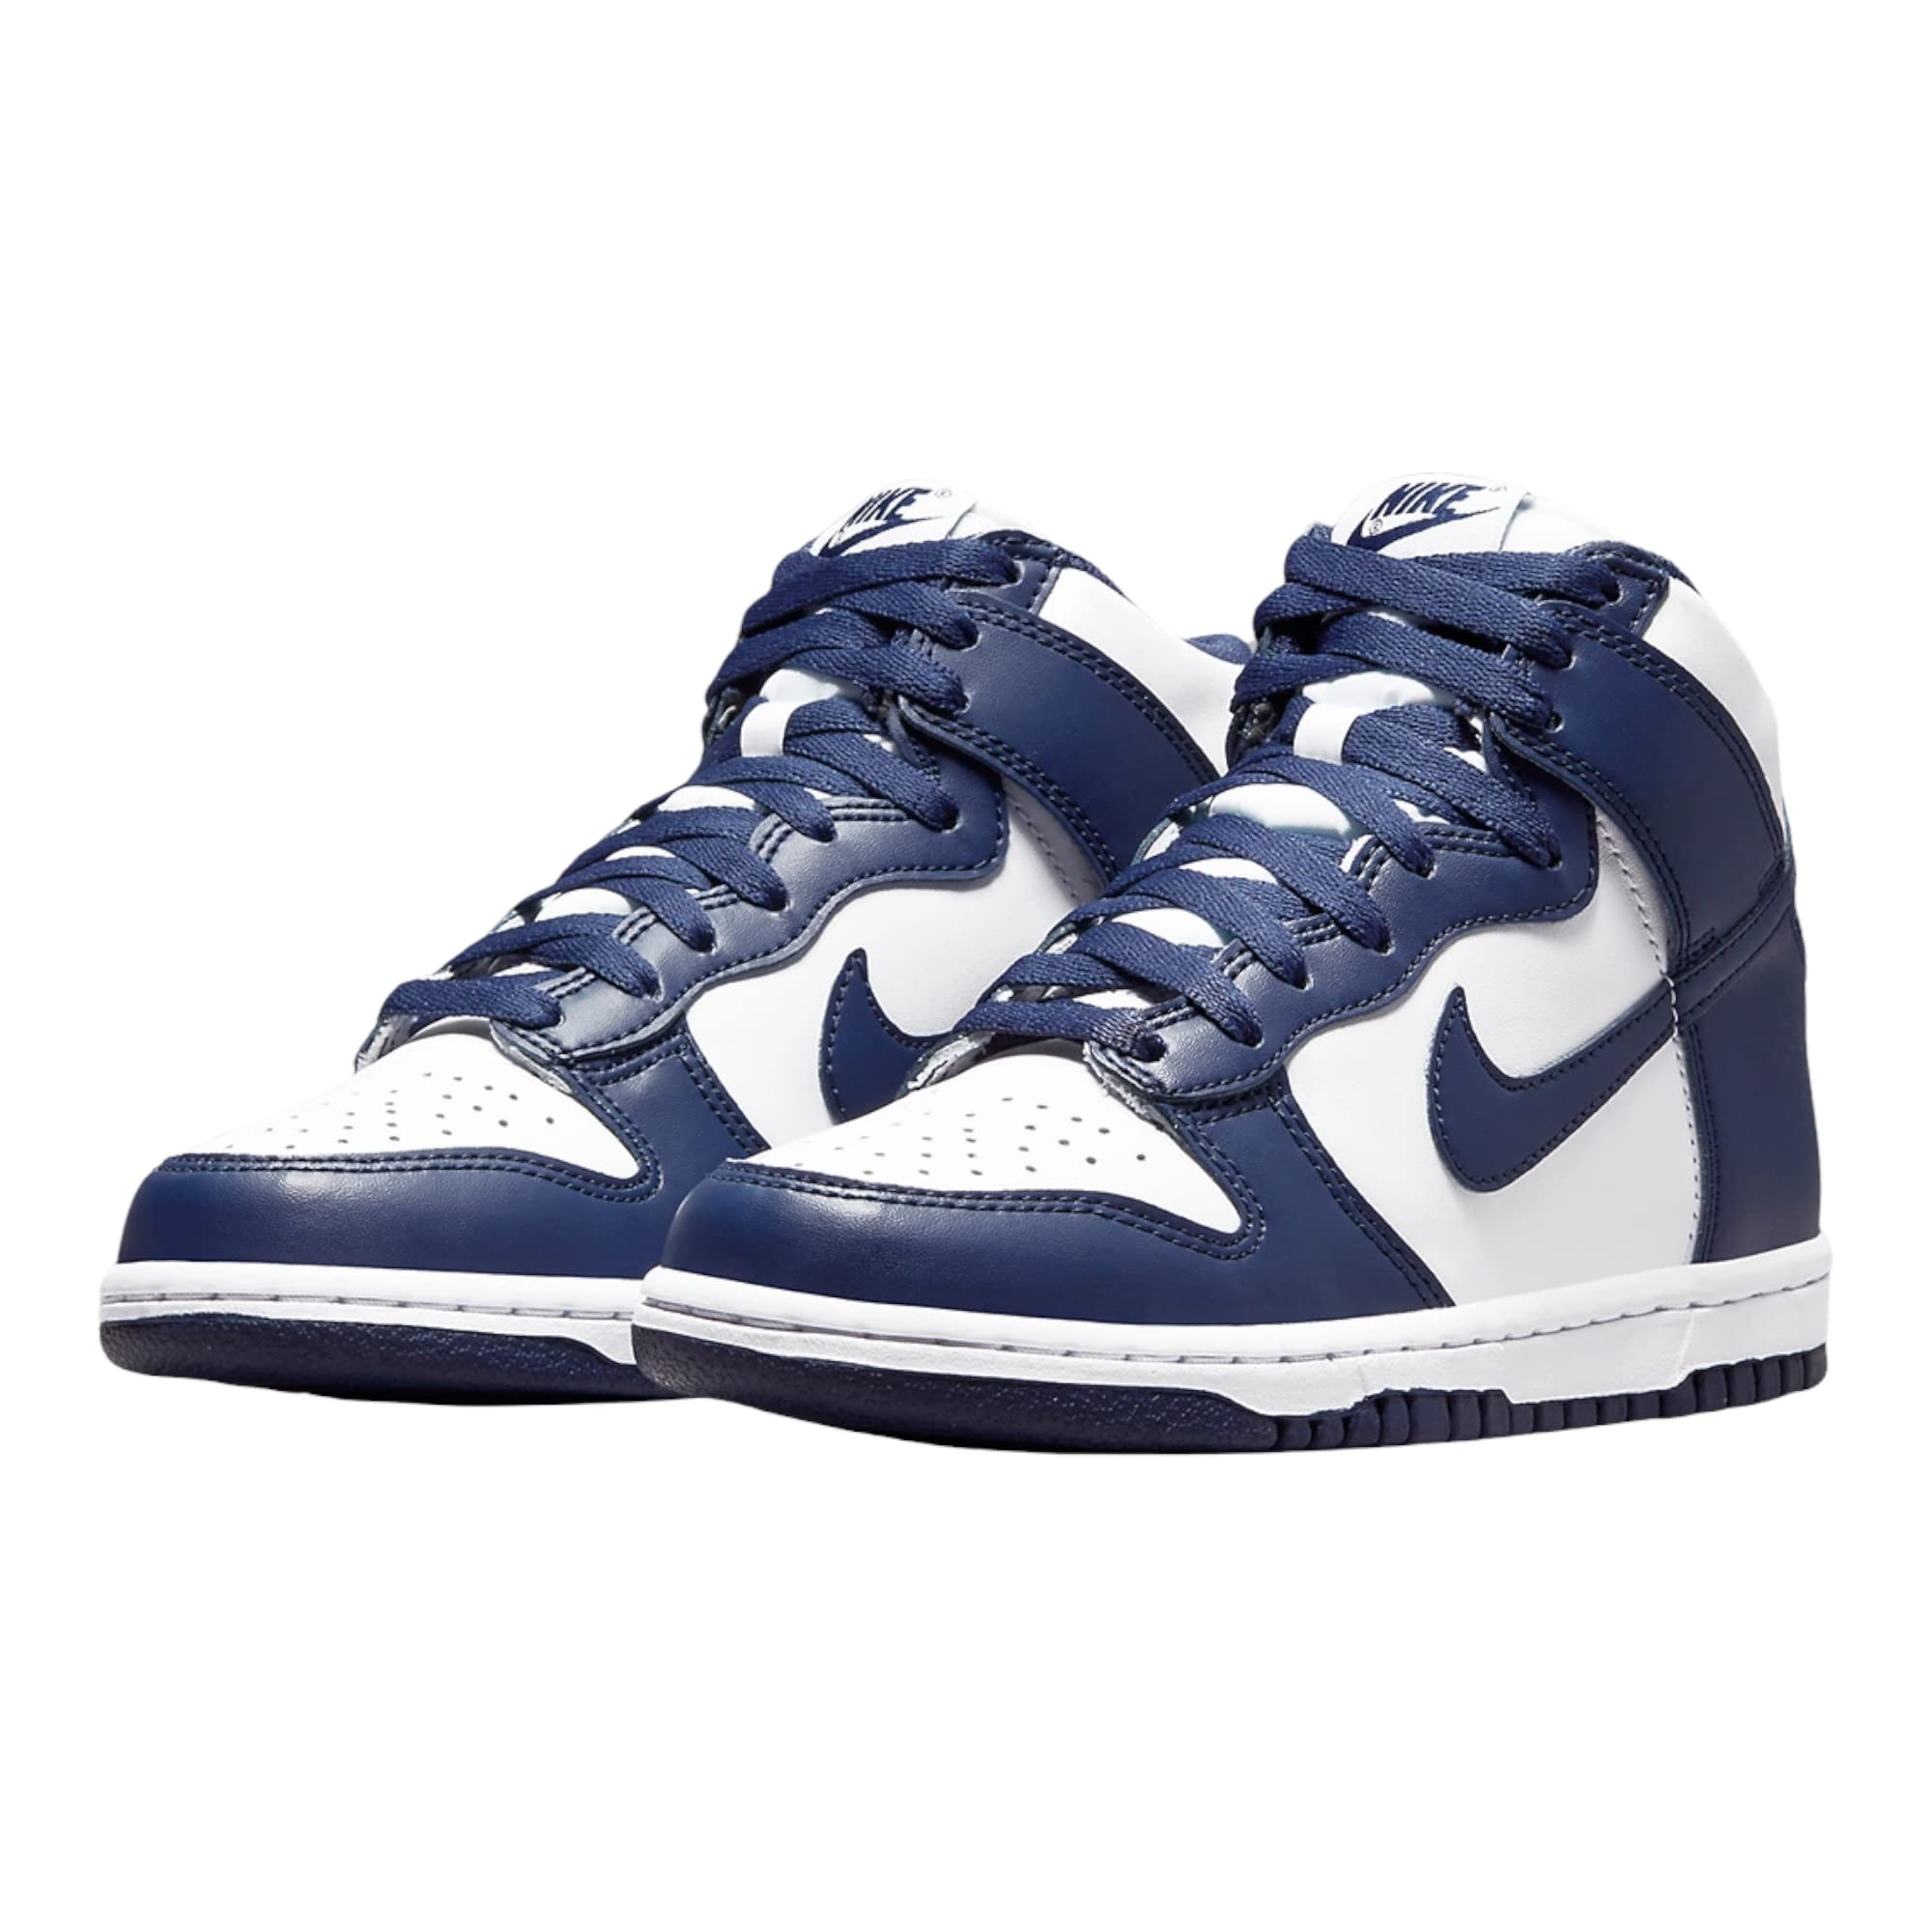 Nike Youth Dunk High GS DH9751-100 Electro Purple Midnght Navy